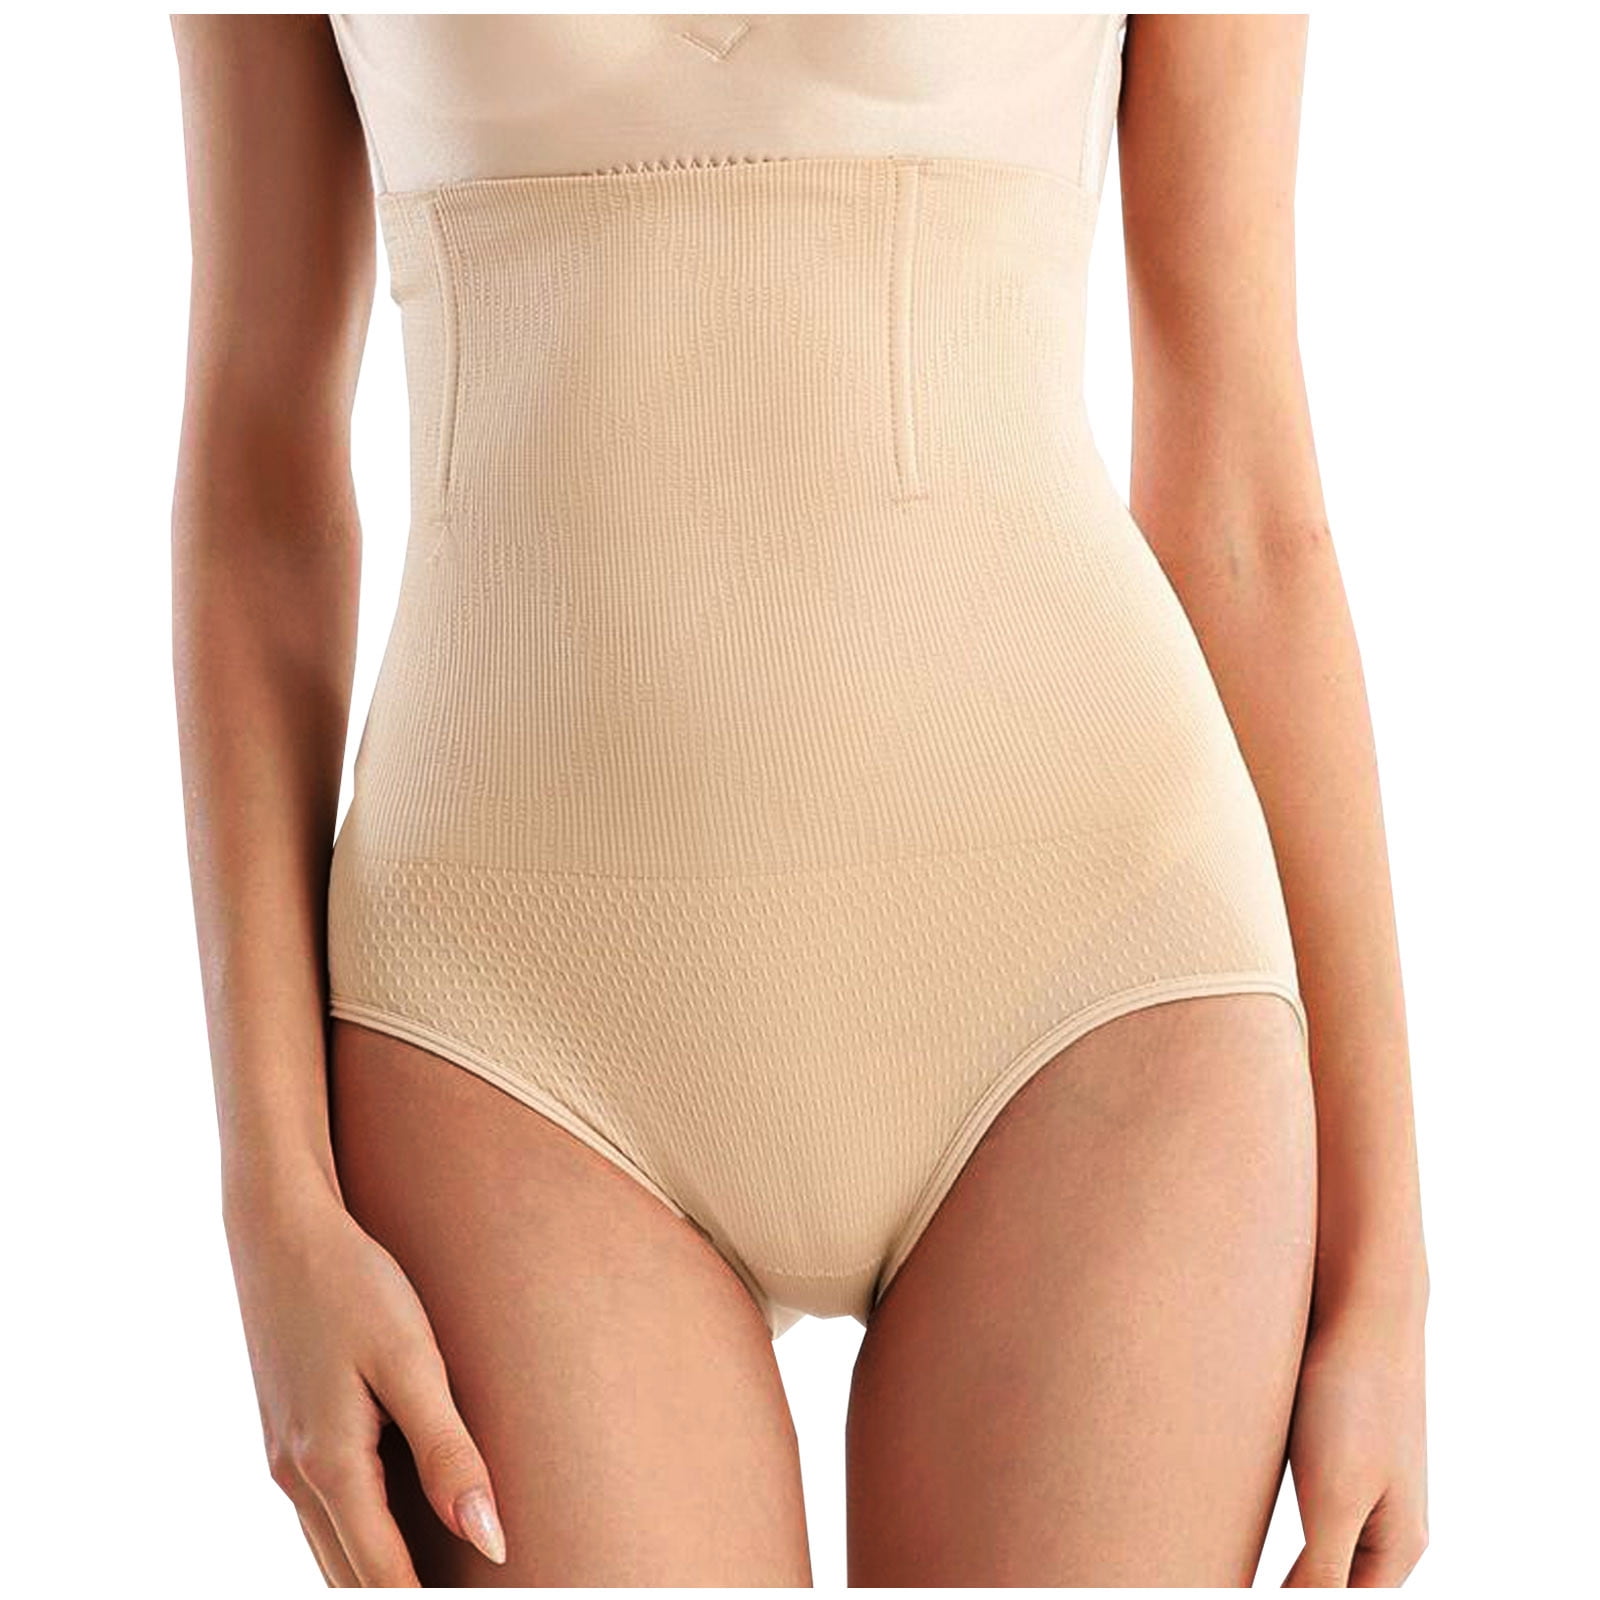 Silene fajas. Body shaper with armhole sleeves and pantyhose. Assorted  colors. Fajas colombianas.